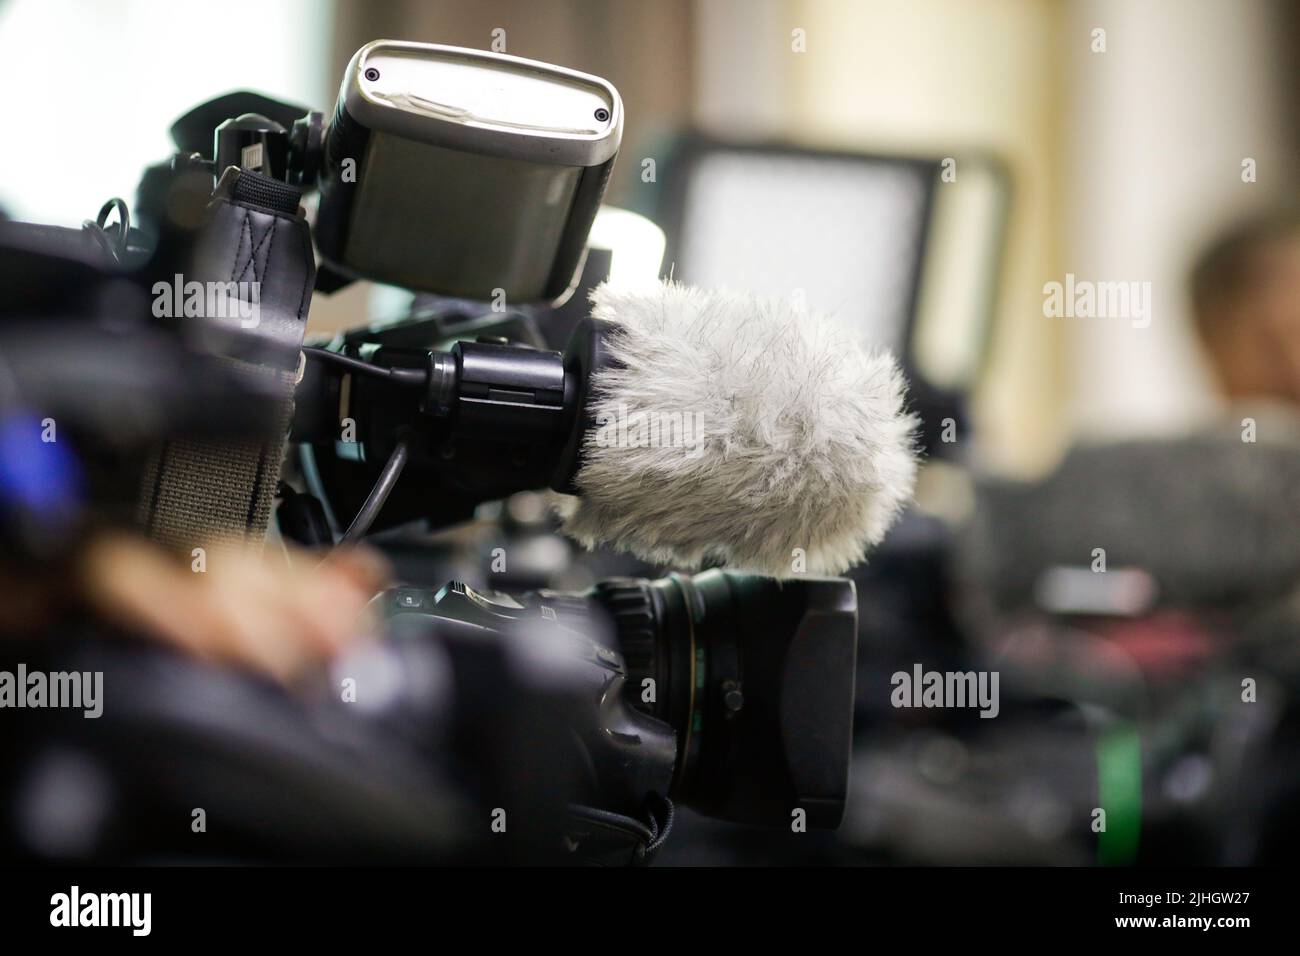 Shallow depth of field (selective focus) details with the microphones and lenses of news tv cameras during a press event Stock Photo